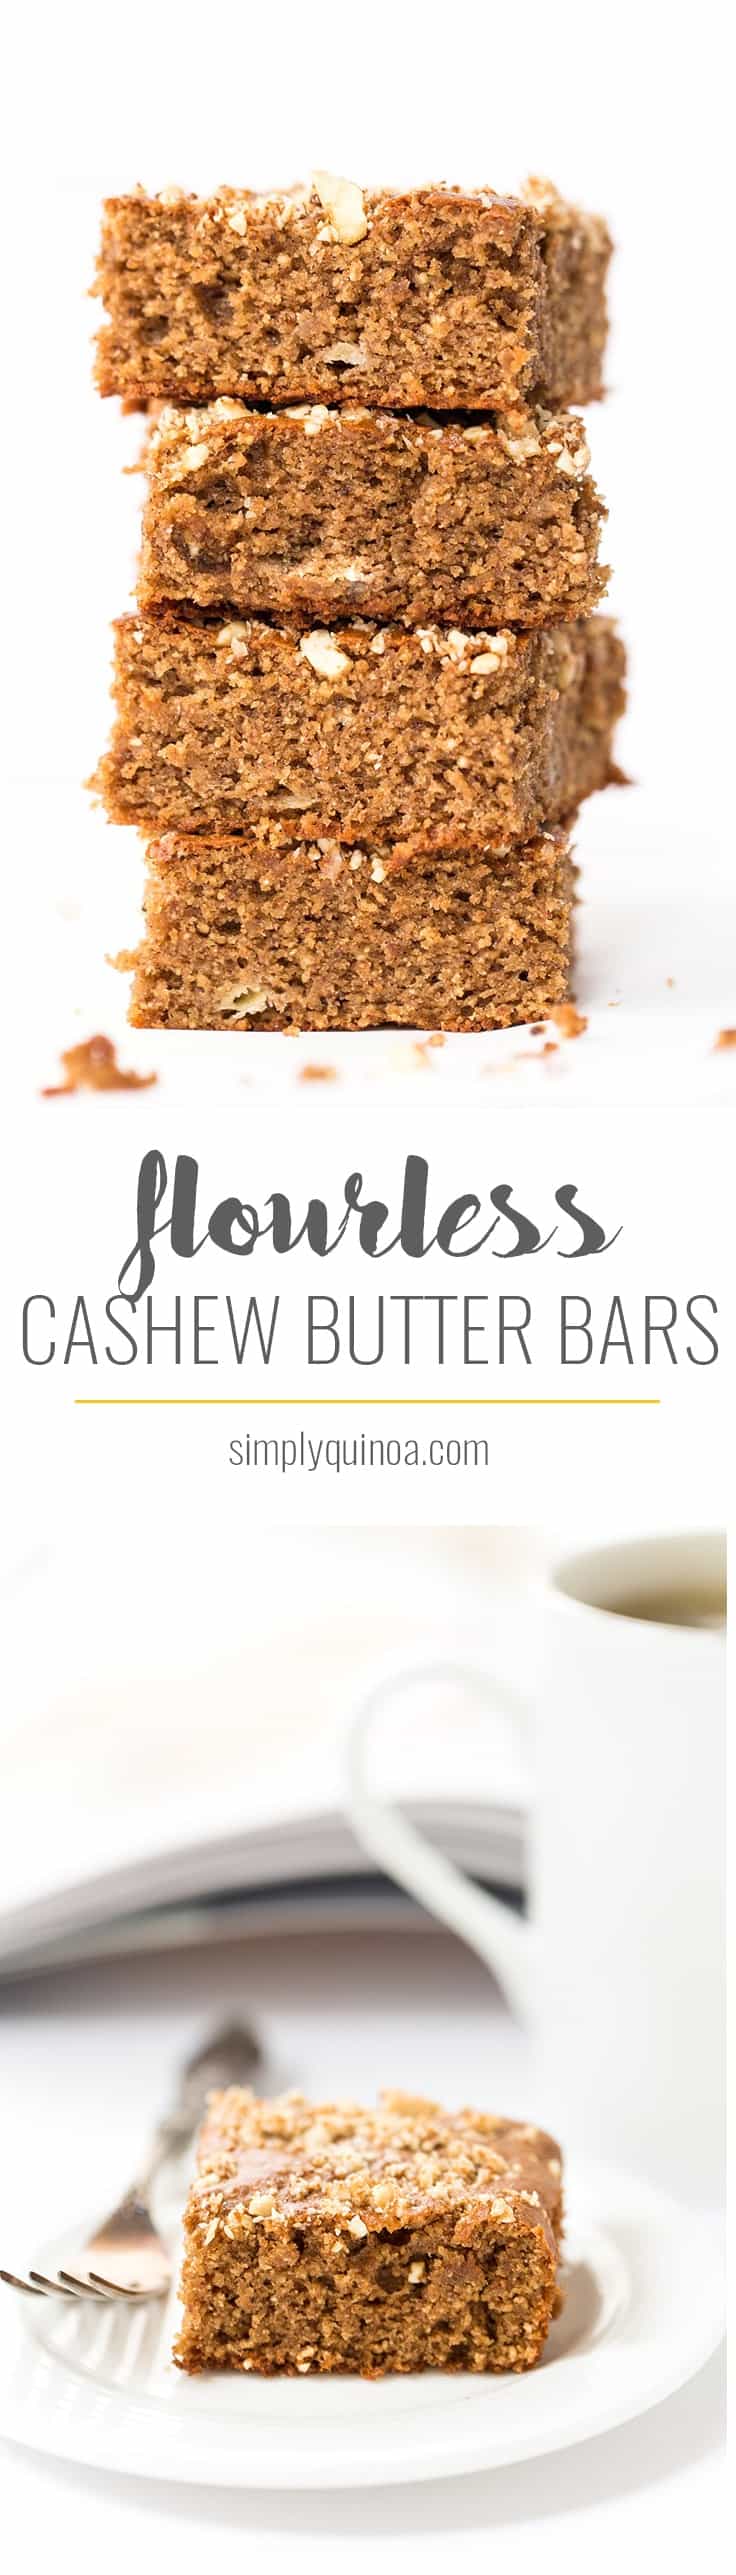 These CASHEW BUTTER BARS are light and fluffy, sweetened without any refined sugar, no oils and no flour, but still decadent, delicious and amazing!